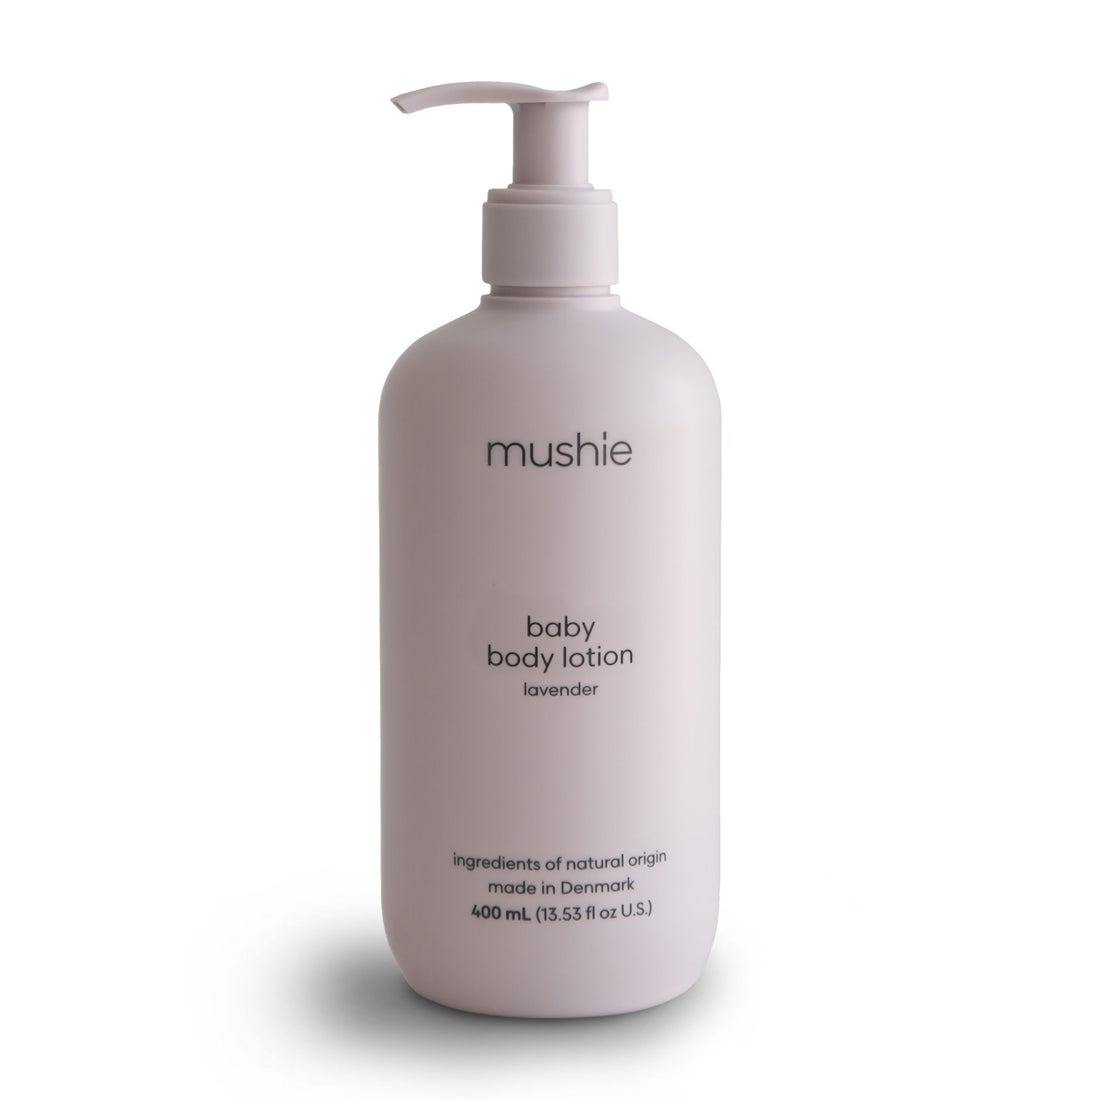 Mushie Baby Body Lotion - Lavender